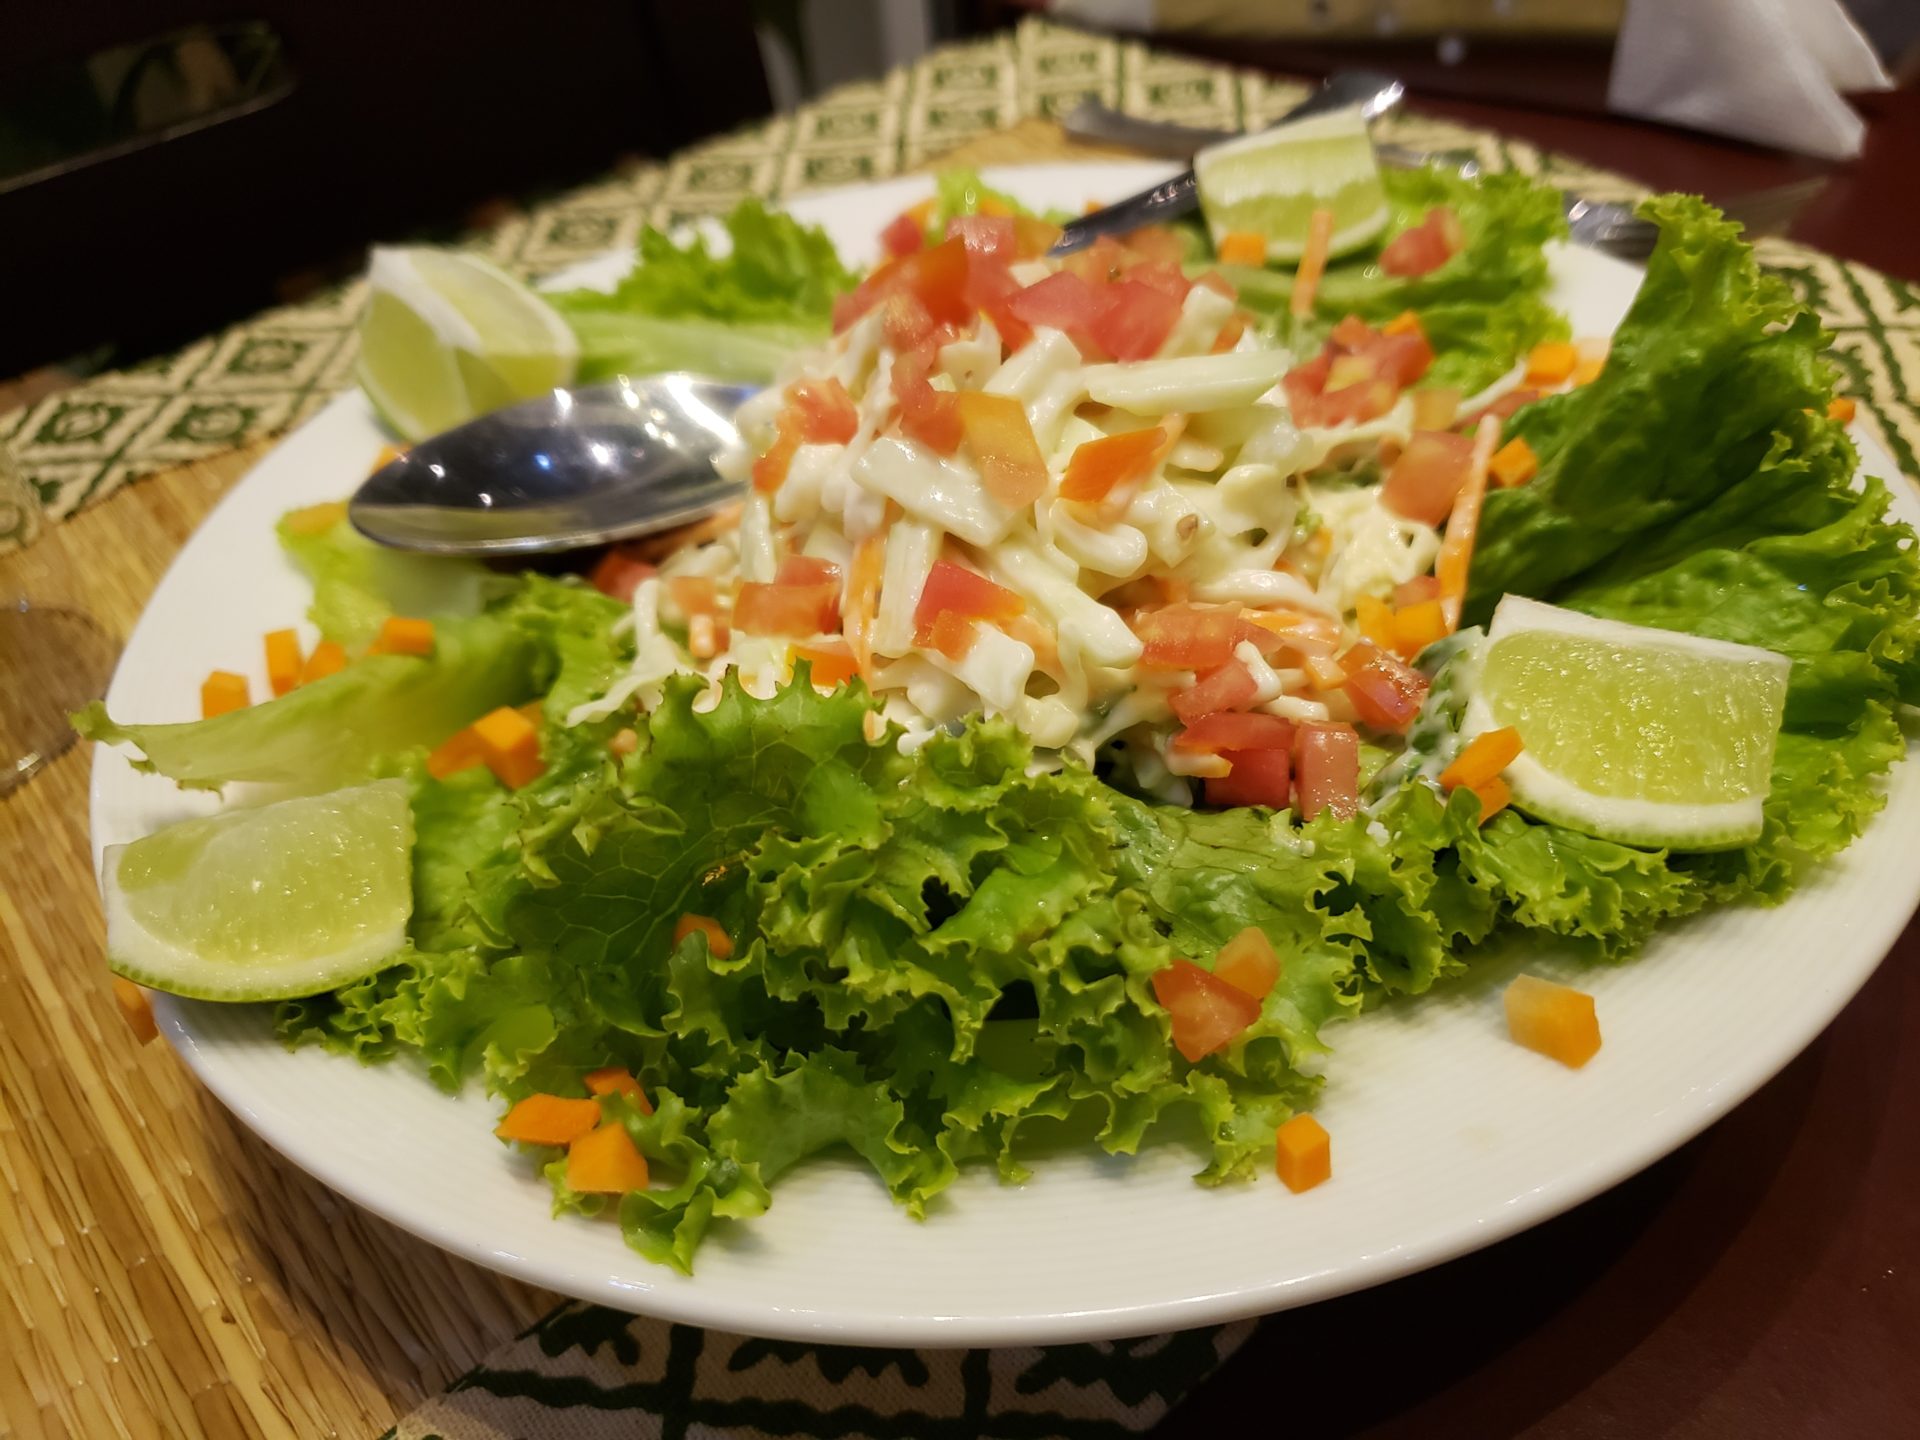 a plate of salad with limes and a spoon